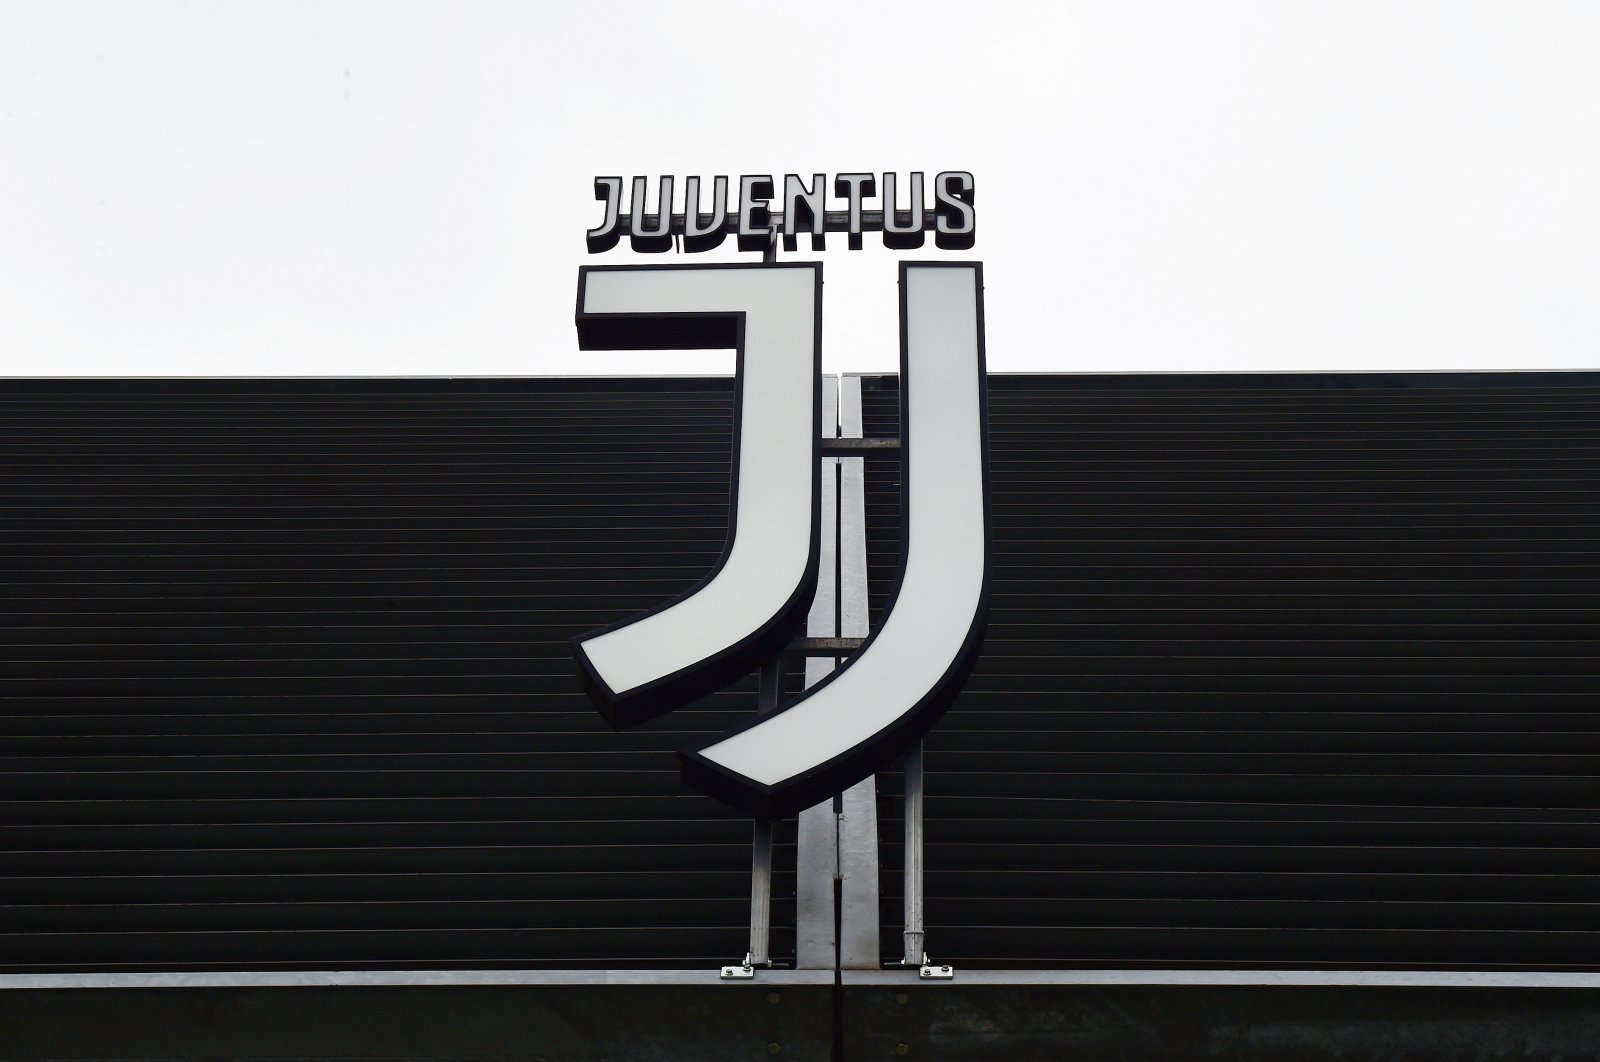 The Juventus club crest seen outside Allianz Stadium in Turin, Italy, March 12, 2020. (Reuters Photo)